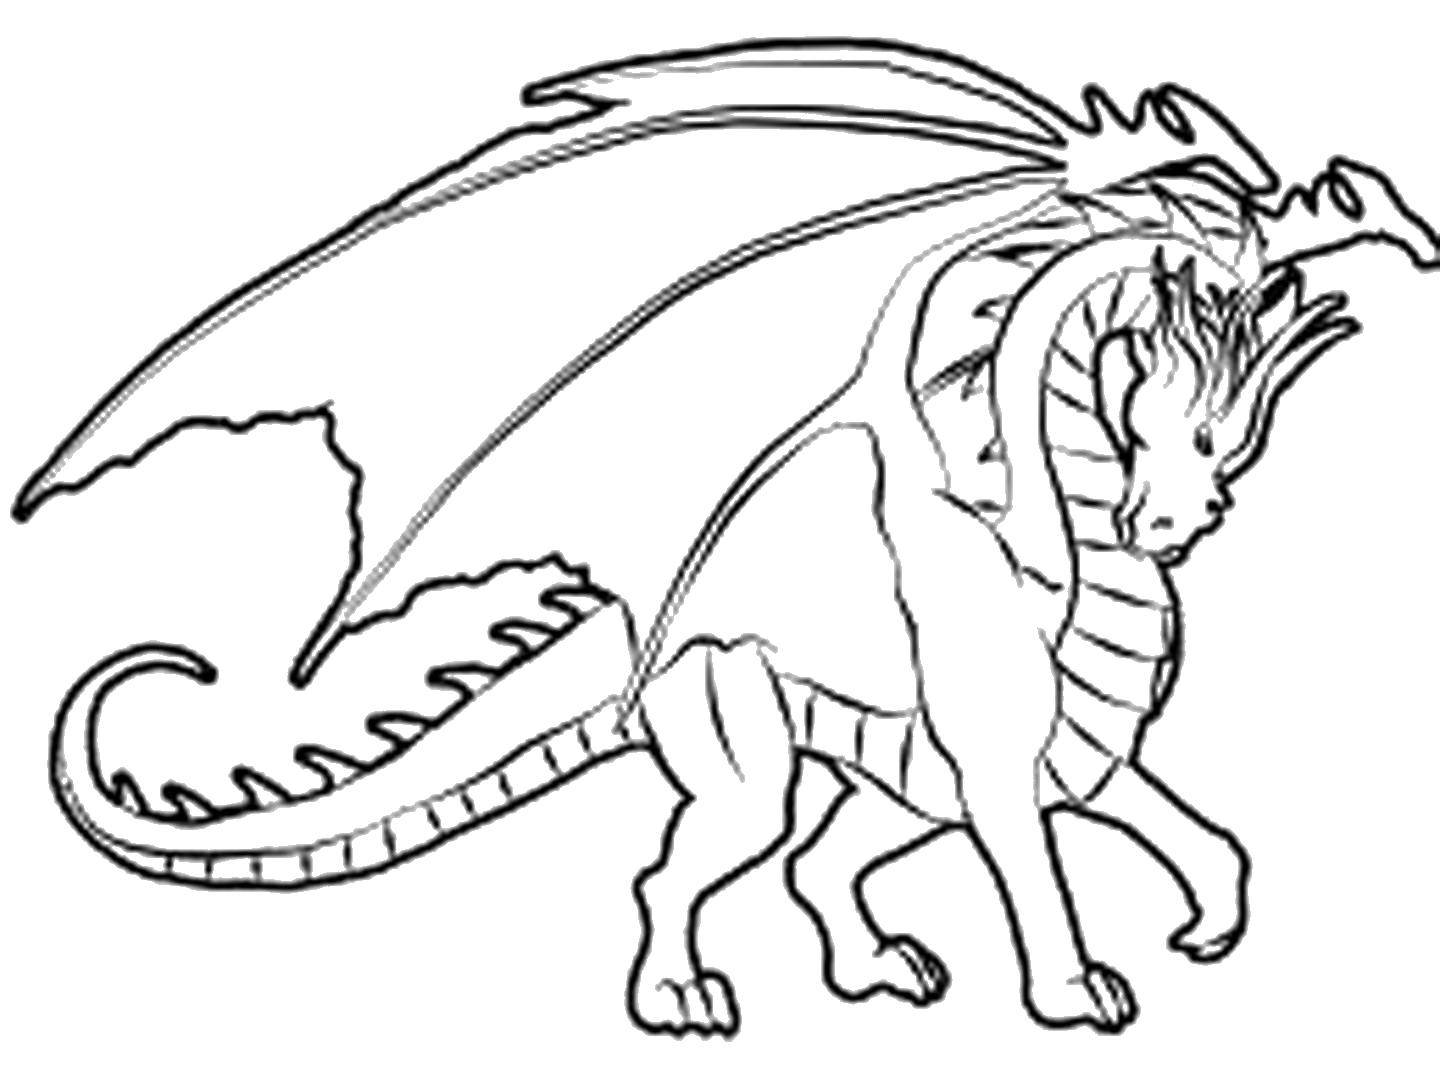 Coloring Majestic dragon. Category Dragons. Tags:  Dragons.